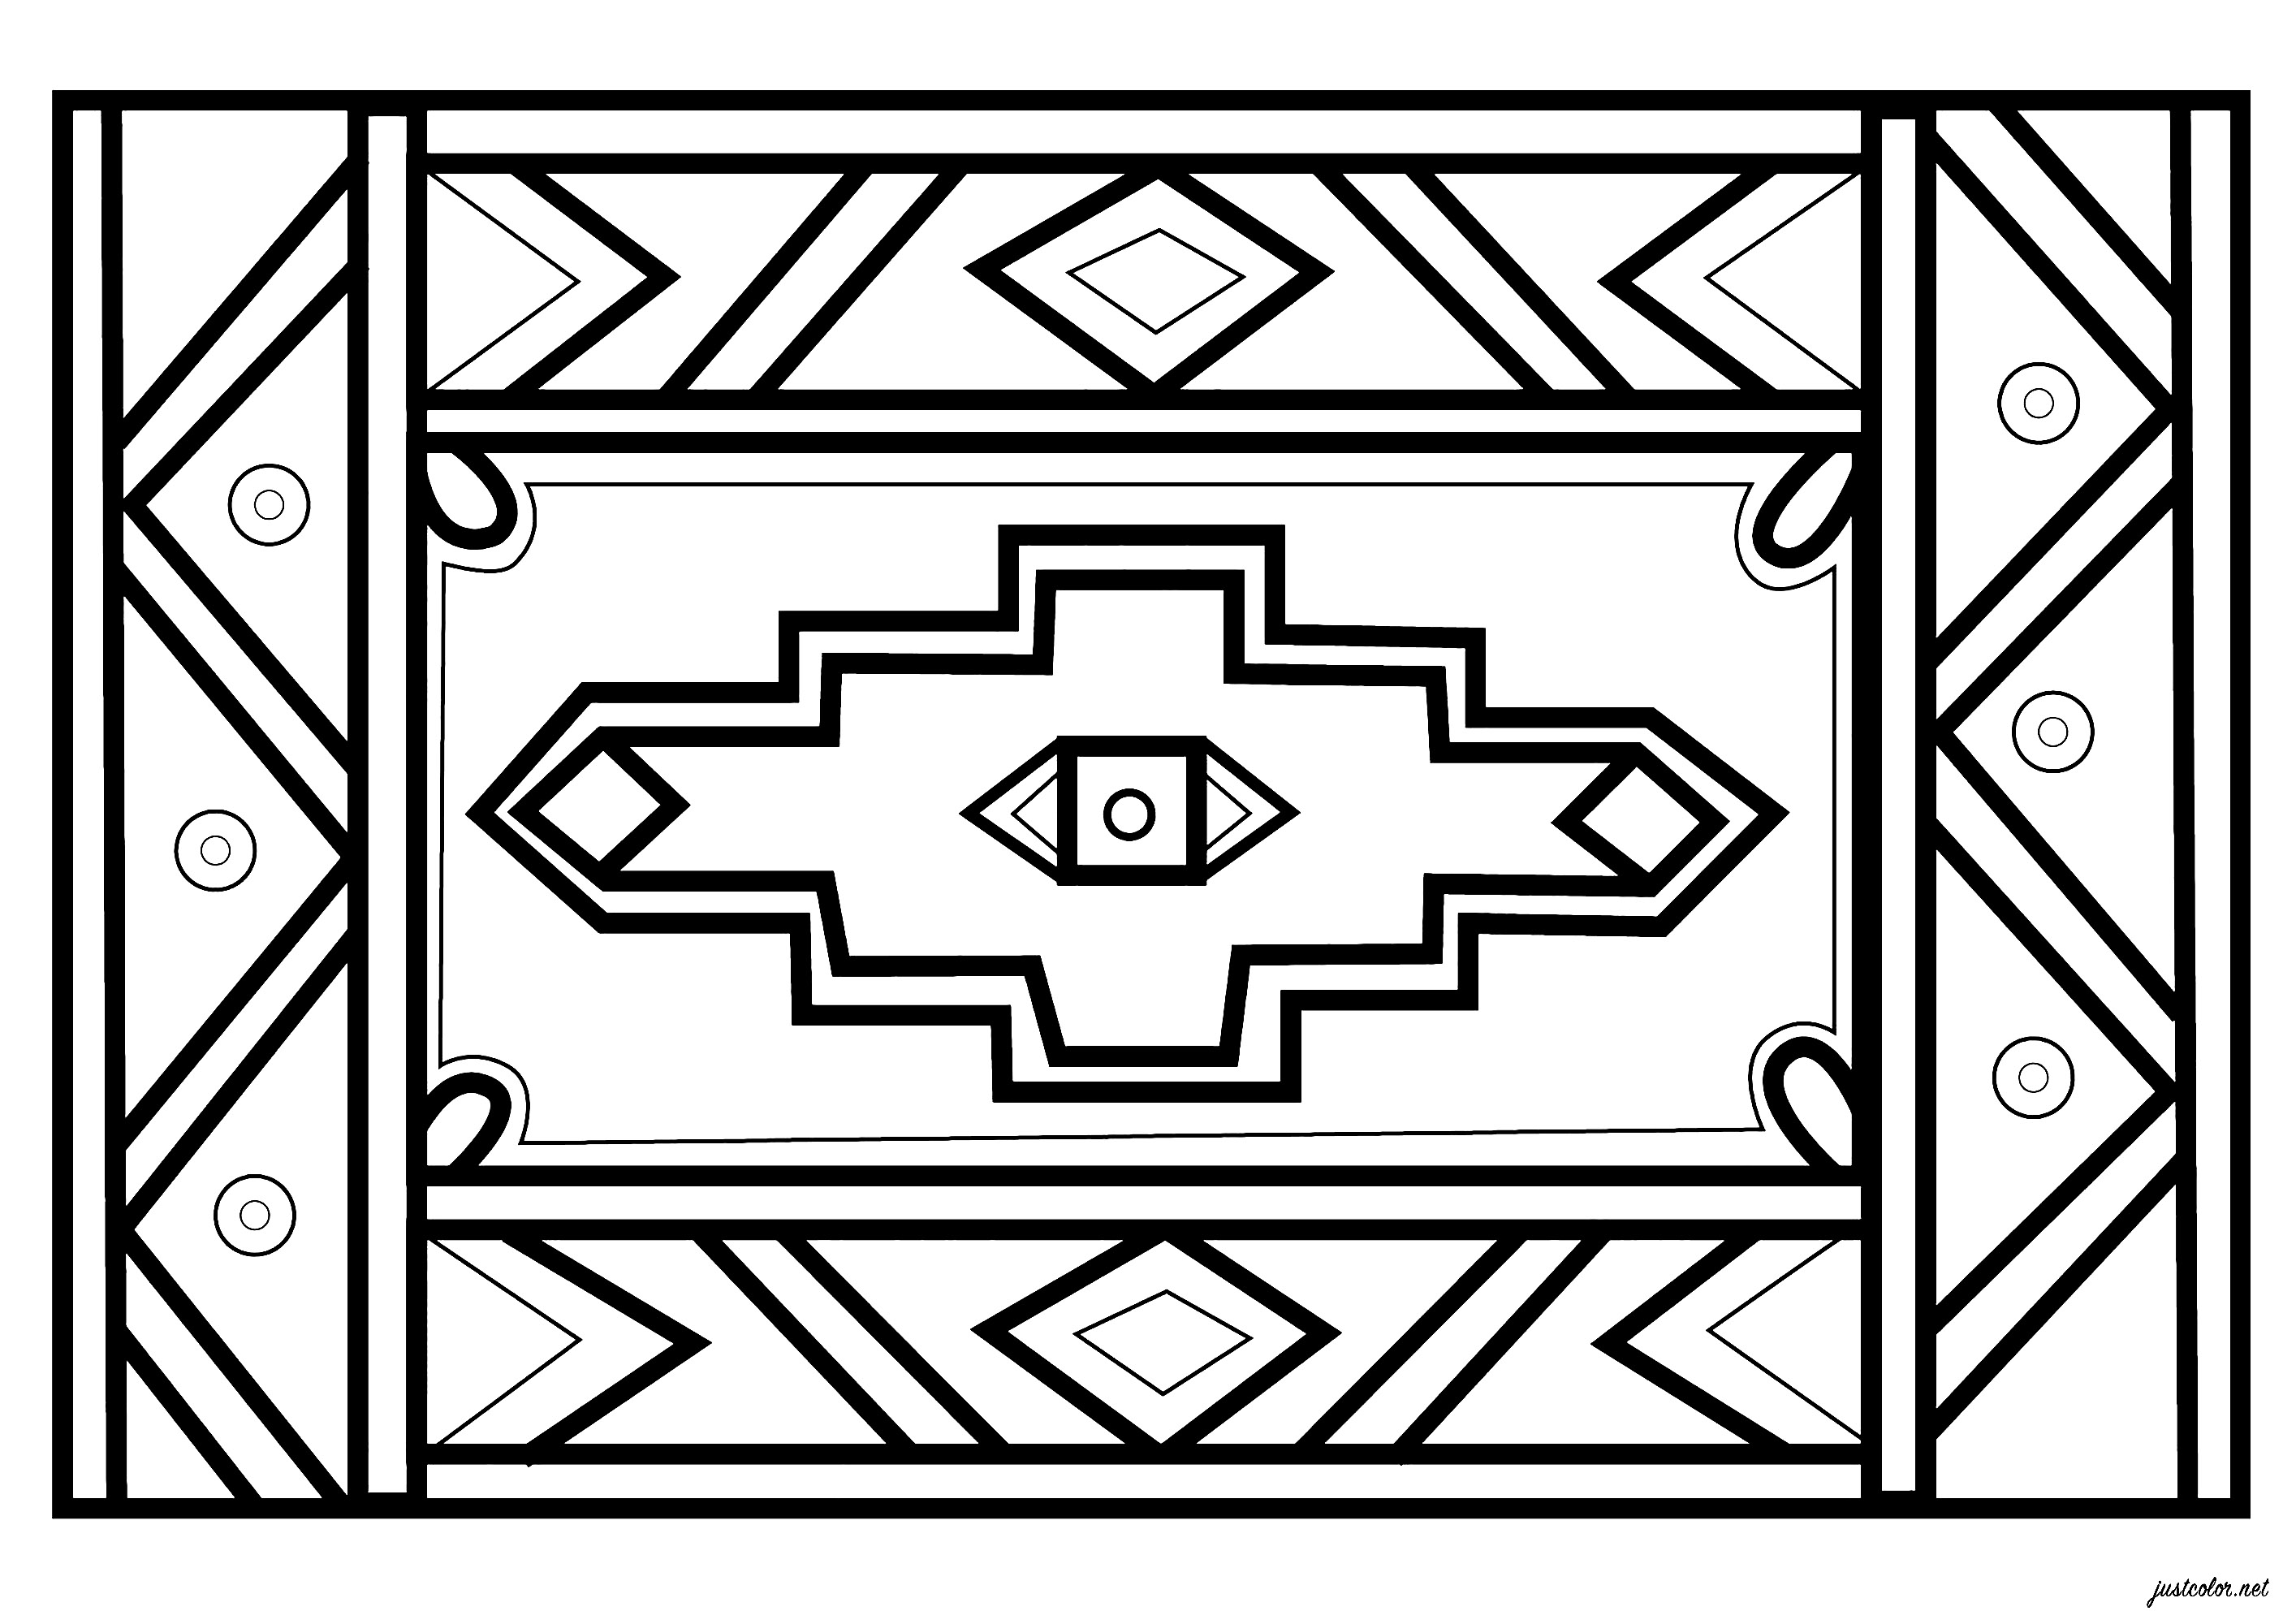 Coloring freely inspired by the paintings of African artist Esther Mahlangu. Esther Mahlangu, born in 1935, is a South African artist of Ndebele culture. She is known for her large-scale contemporary paintings, in a geometric style referring to her Ndebele heritage, Artist : Esteban